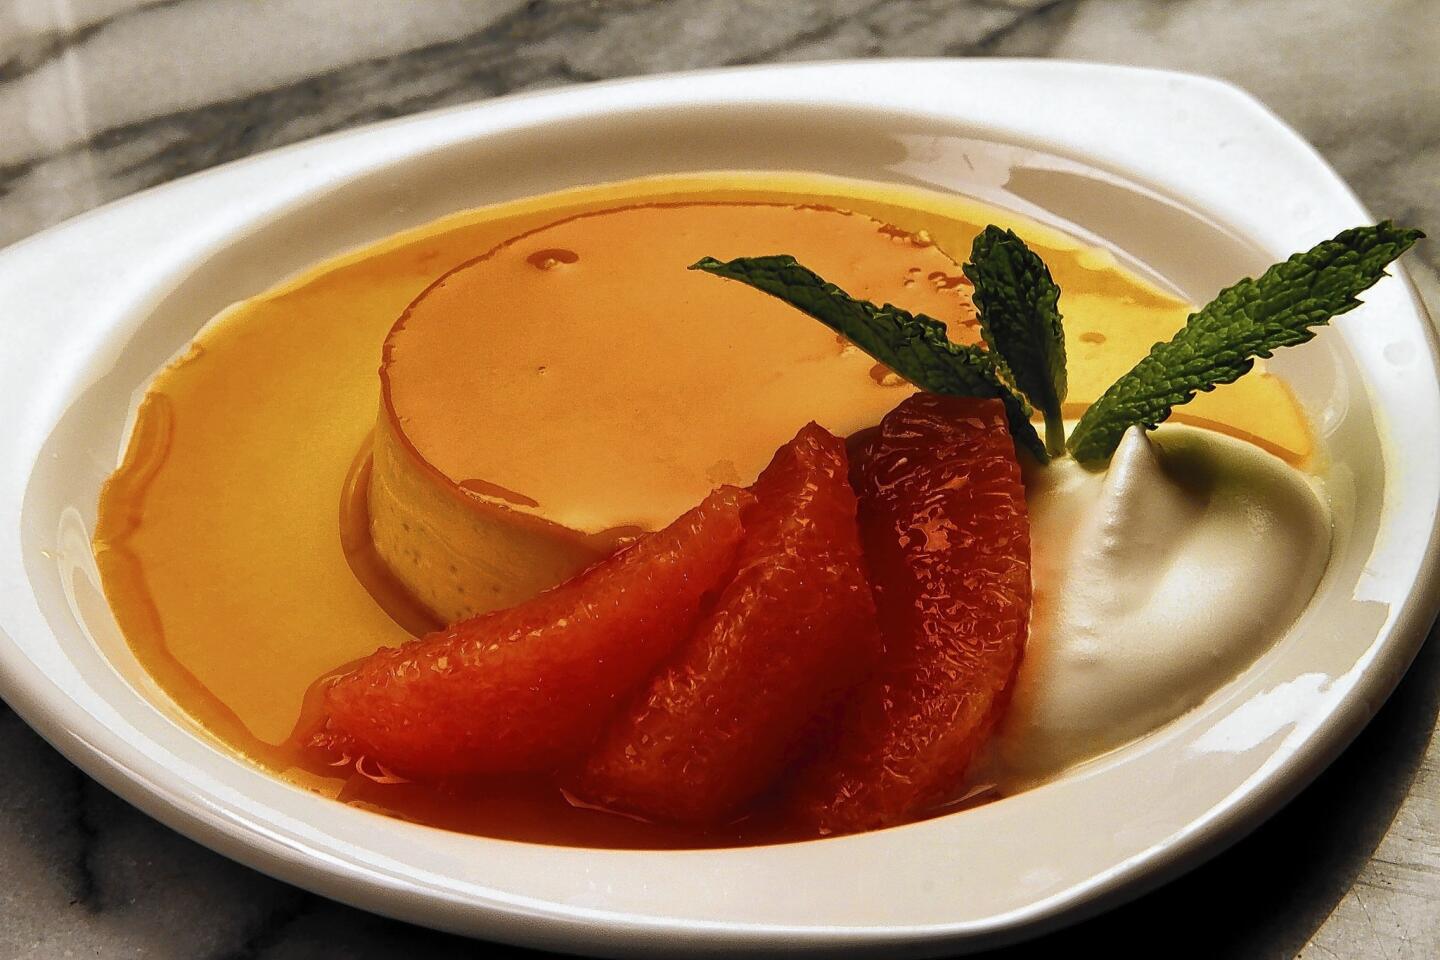 Jose Anders' flan from Jaleo